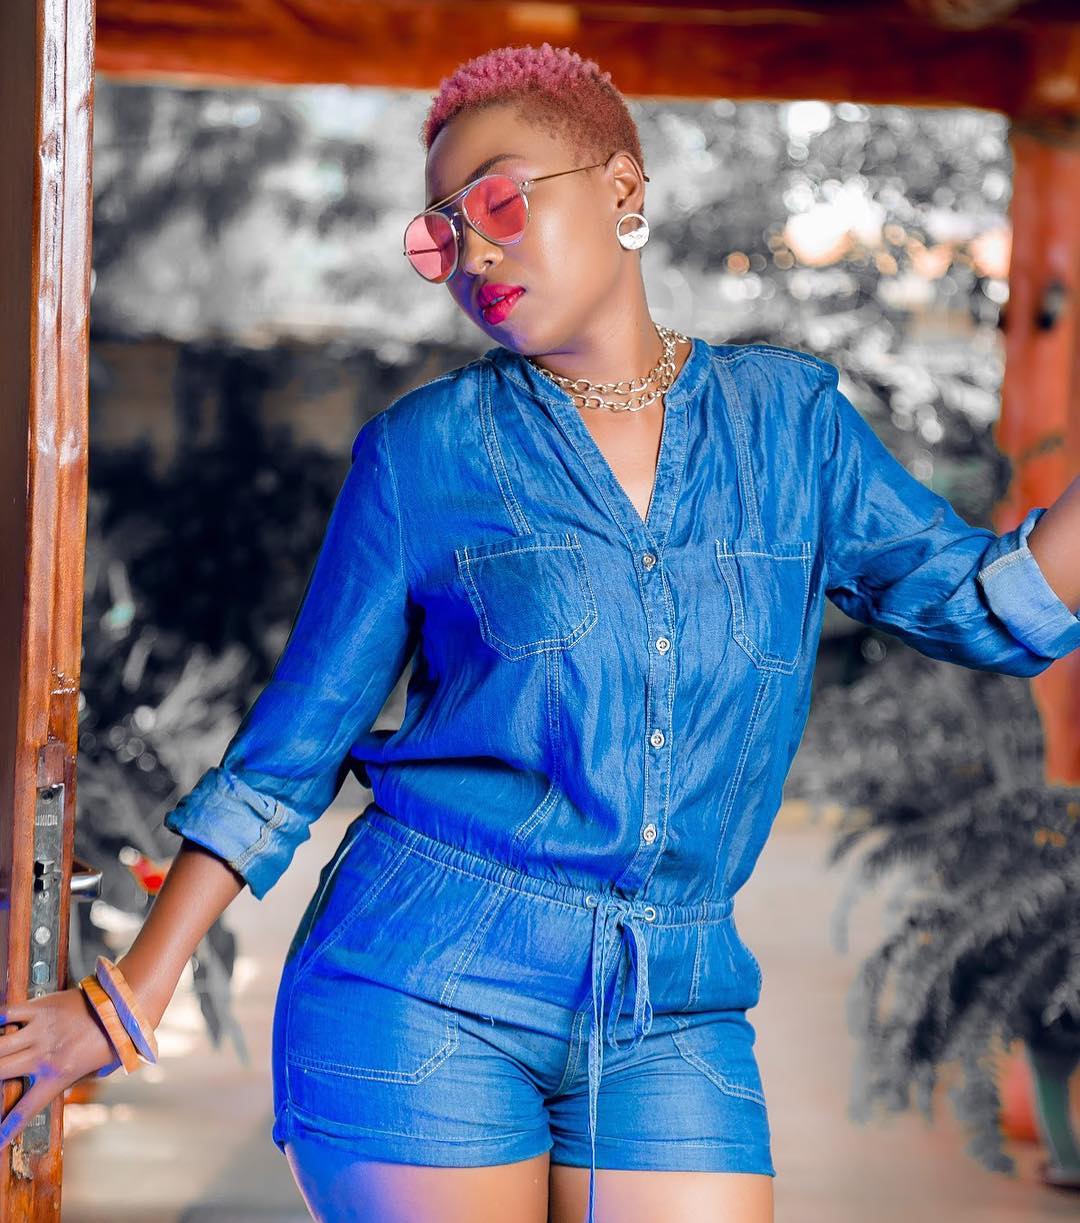 Vivianne proved few Kenyan artists are good performers